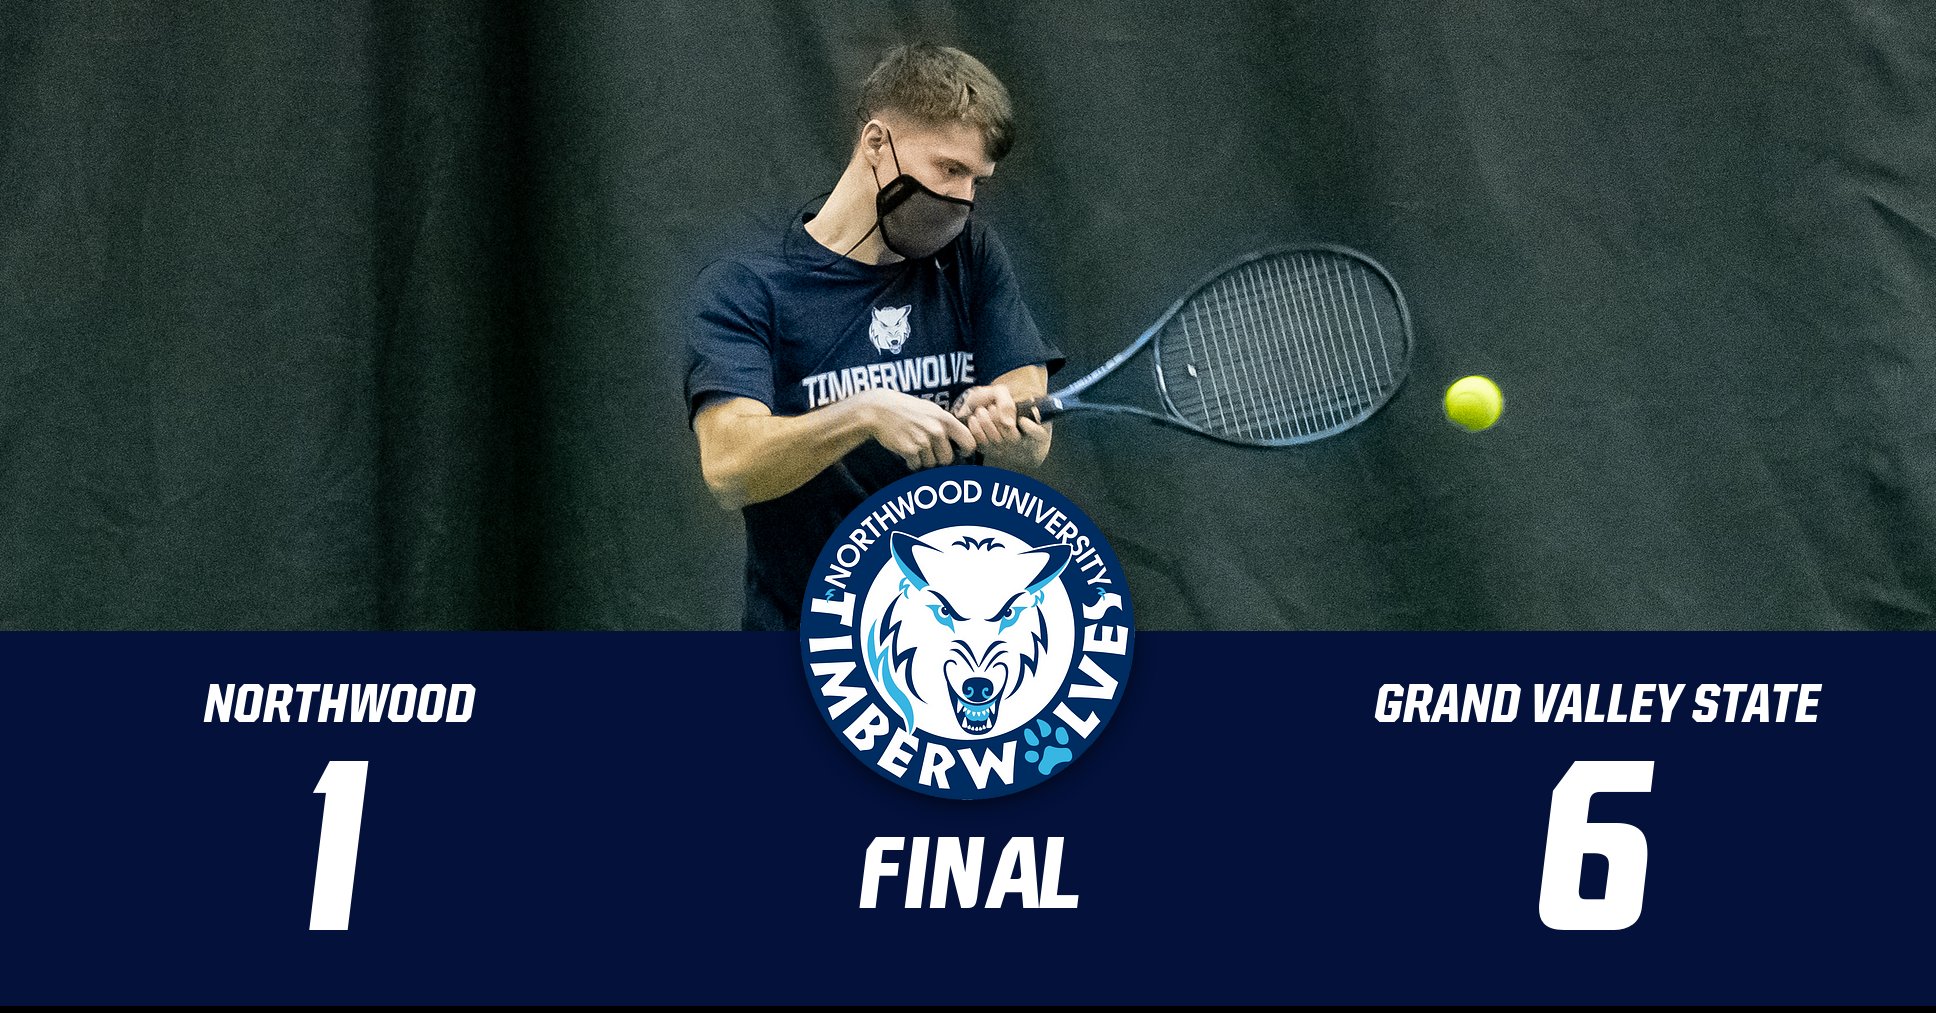 Men's Tennis Loses To Grand Valley State 6-1